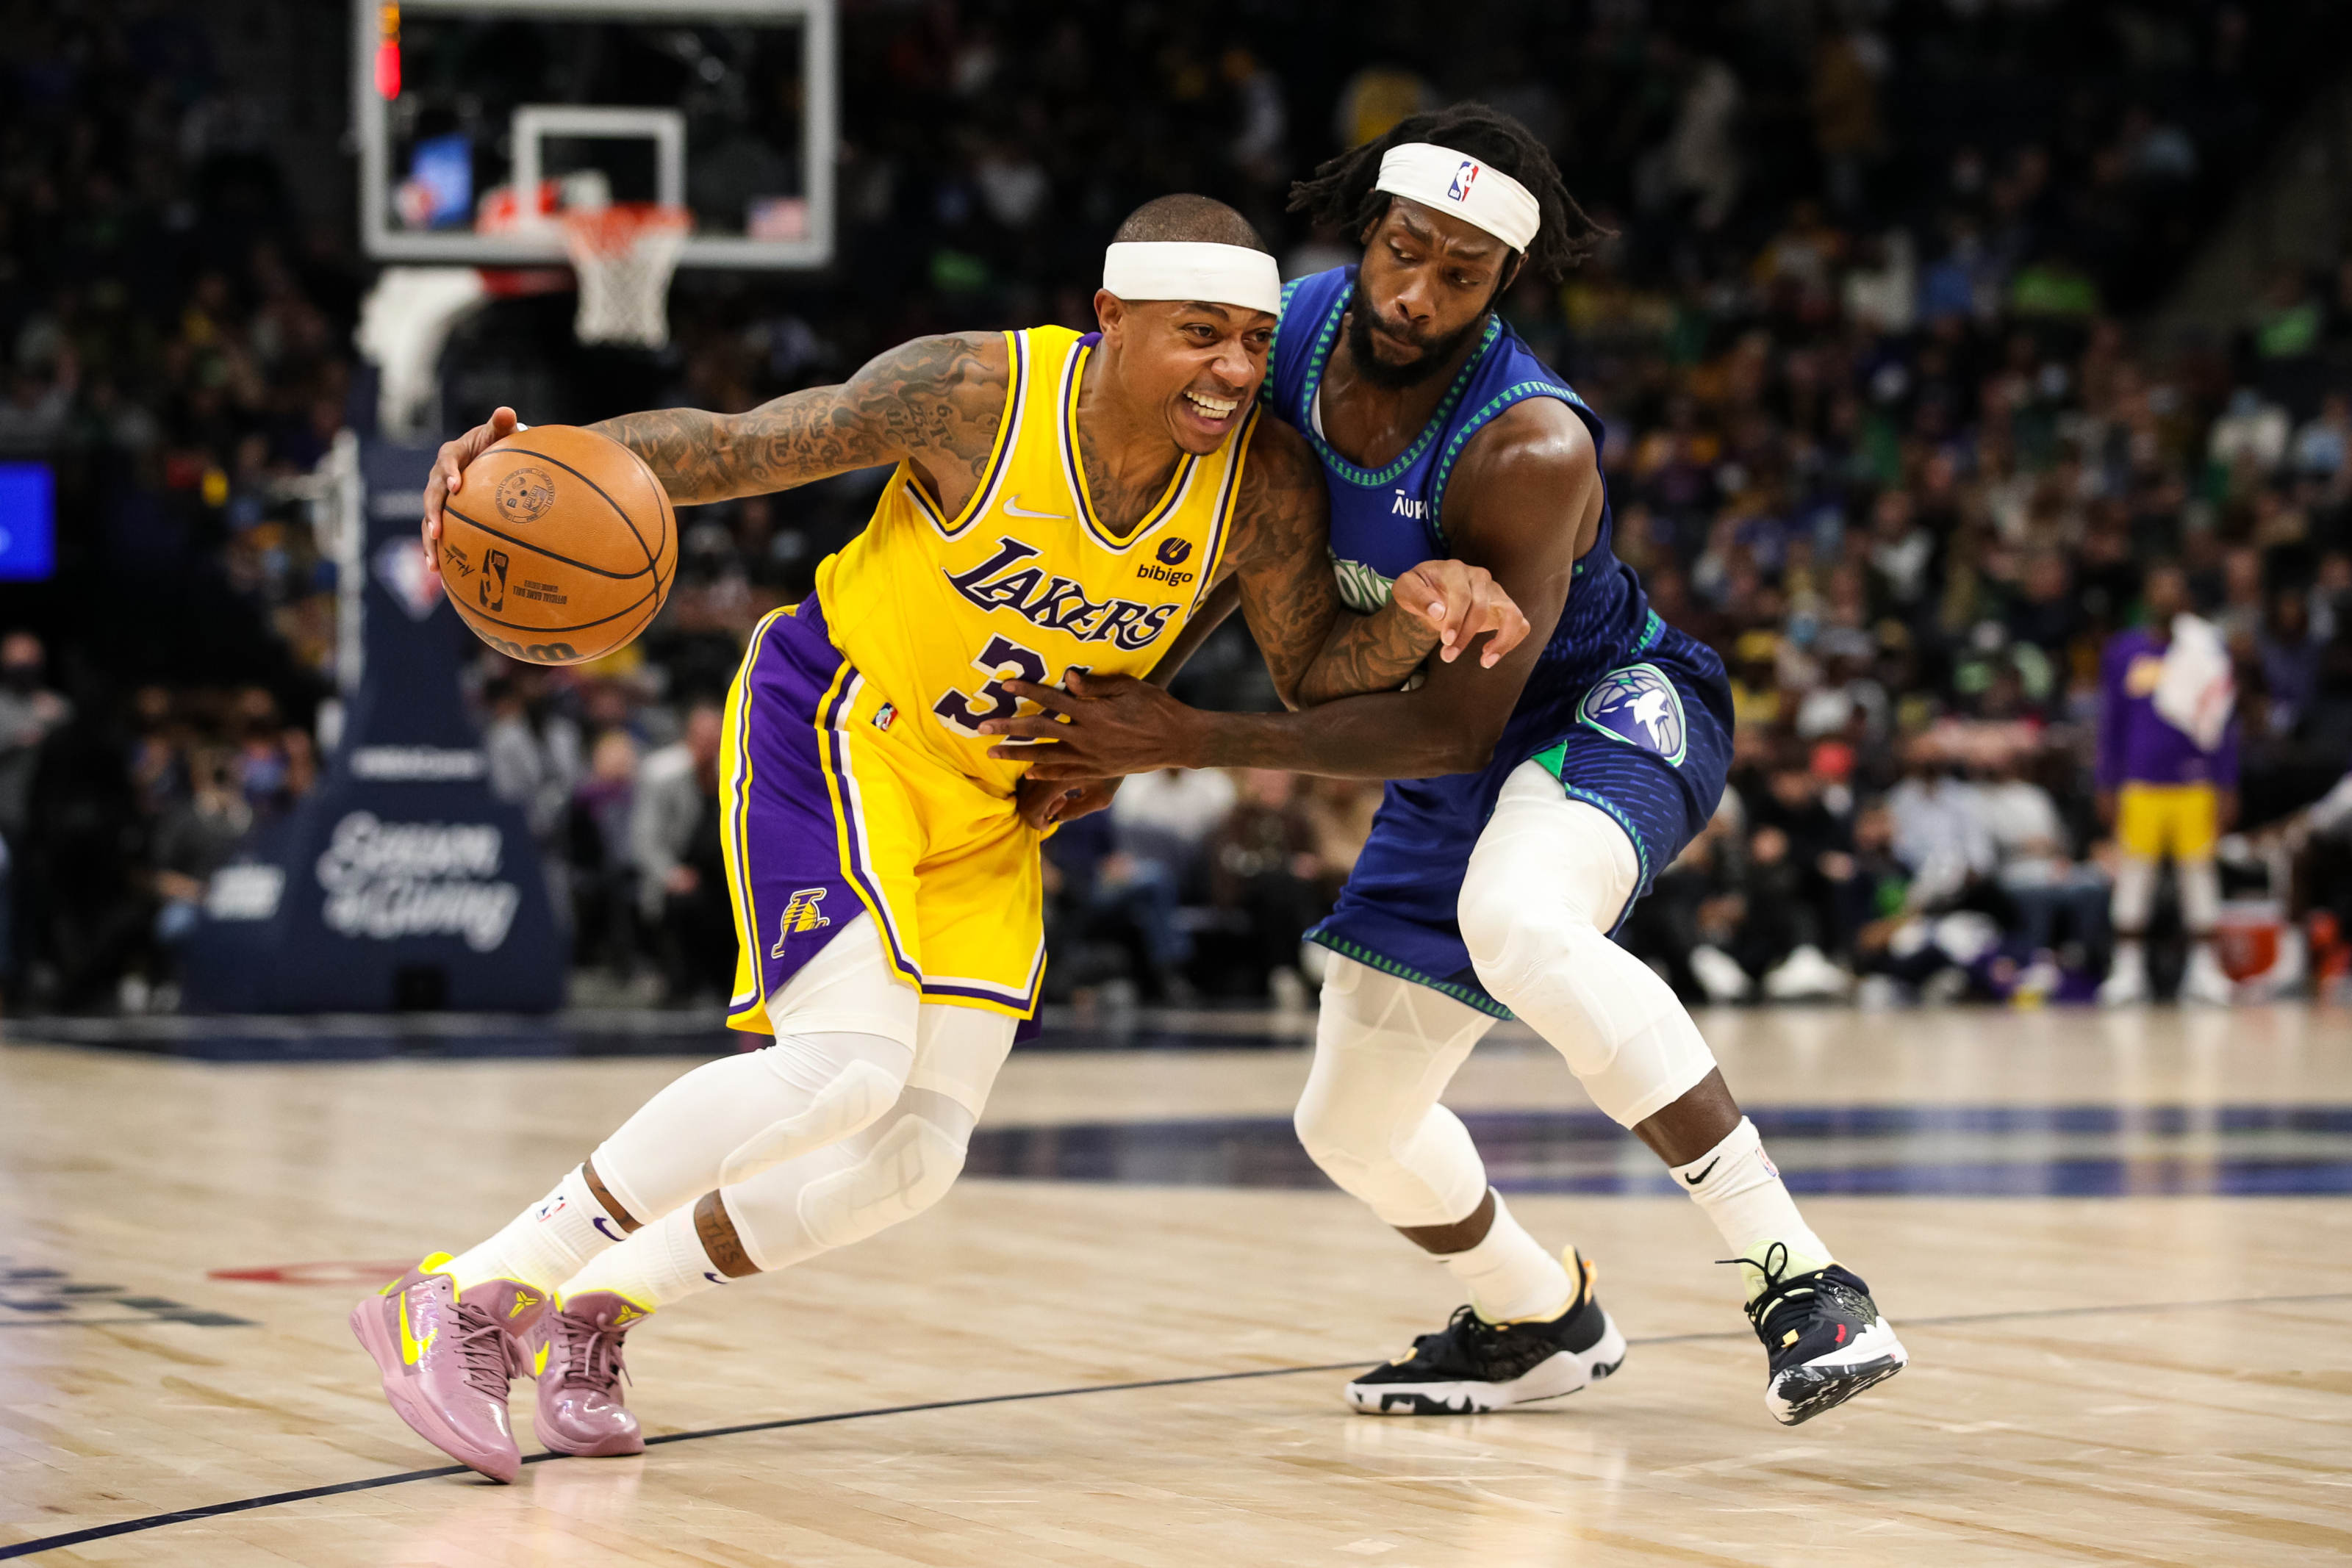 Confidence of 3 coaches paved Isaiah Thomas”s path to All-Star